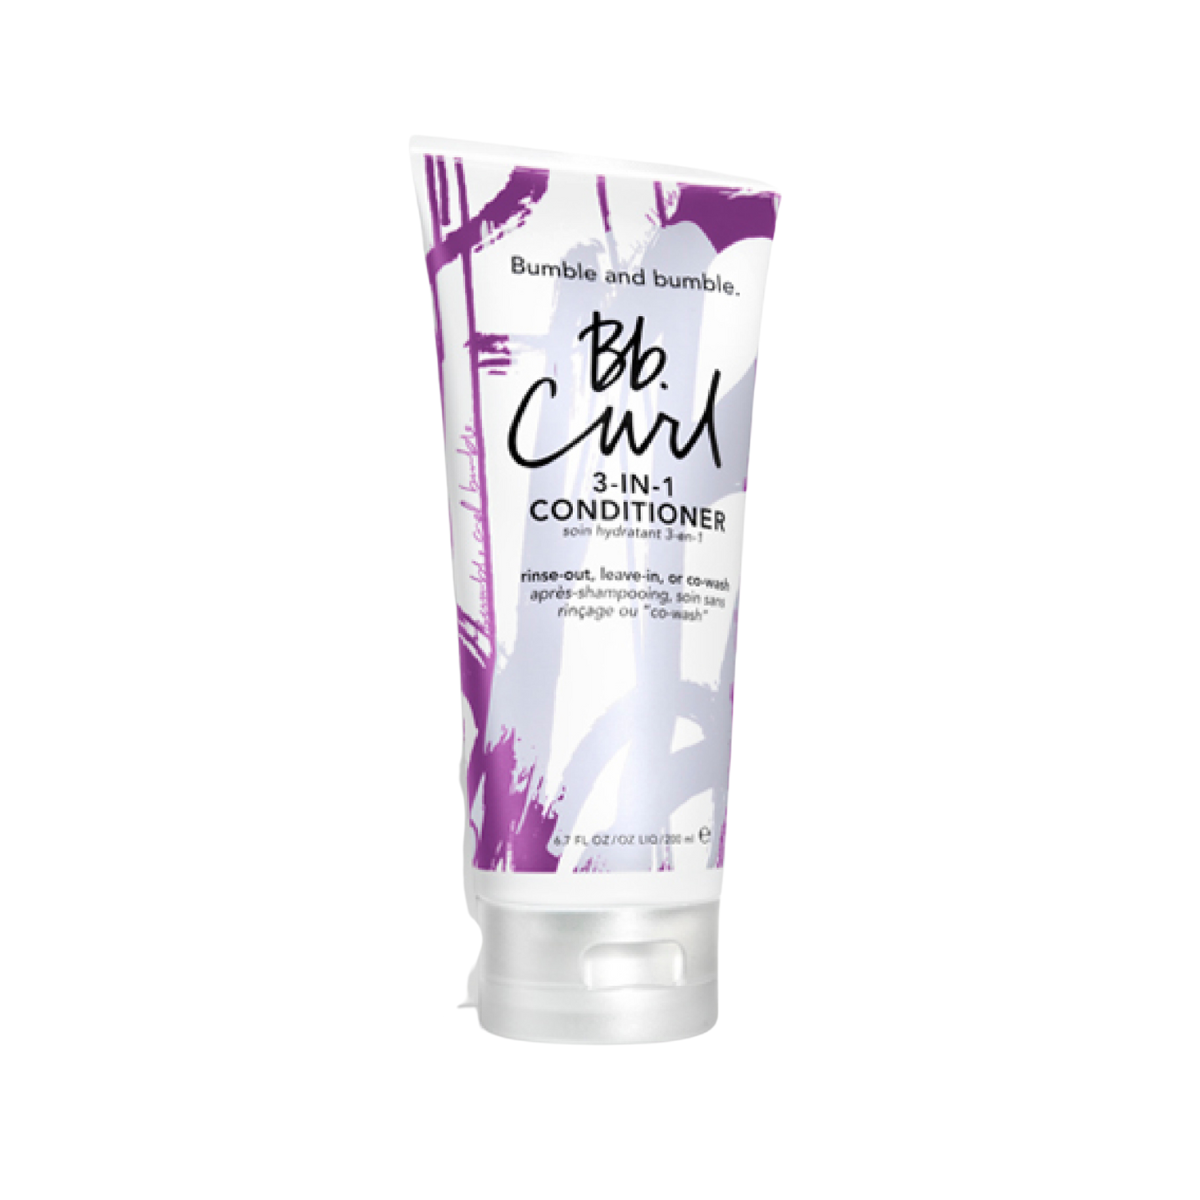 Bumble and Bumble Curl Conditioner 200ml